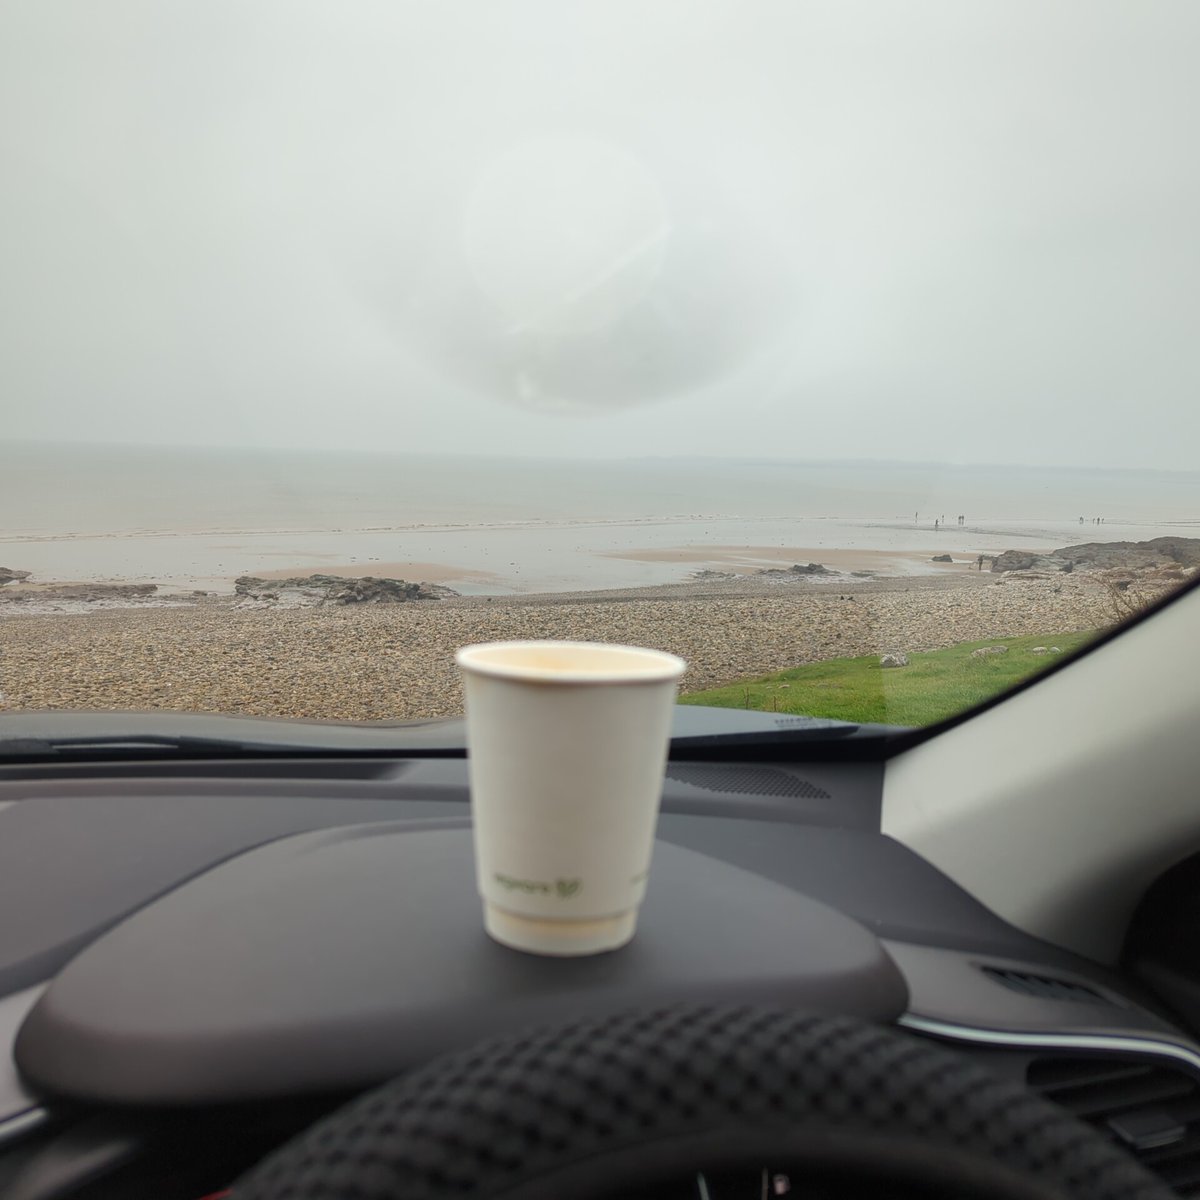 #coffee #brewwithaview #landroverdefender #ogmorebysea @ Ogmore-by-Sea, Vale of Glamorgan
A Lifesaver, after a walk in the drizzle & rain a welcome sight , coffee and a cake 😋